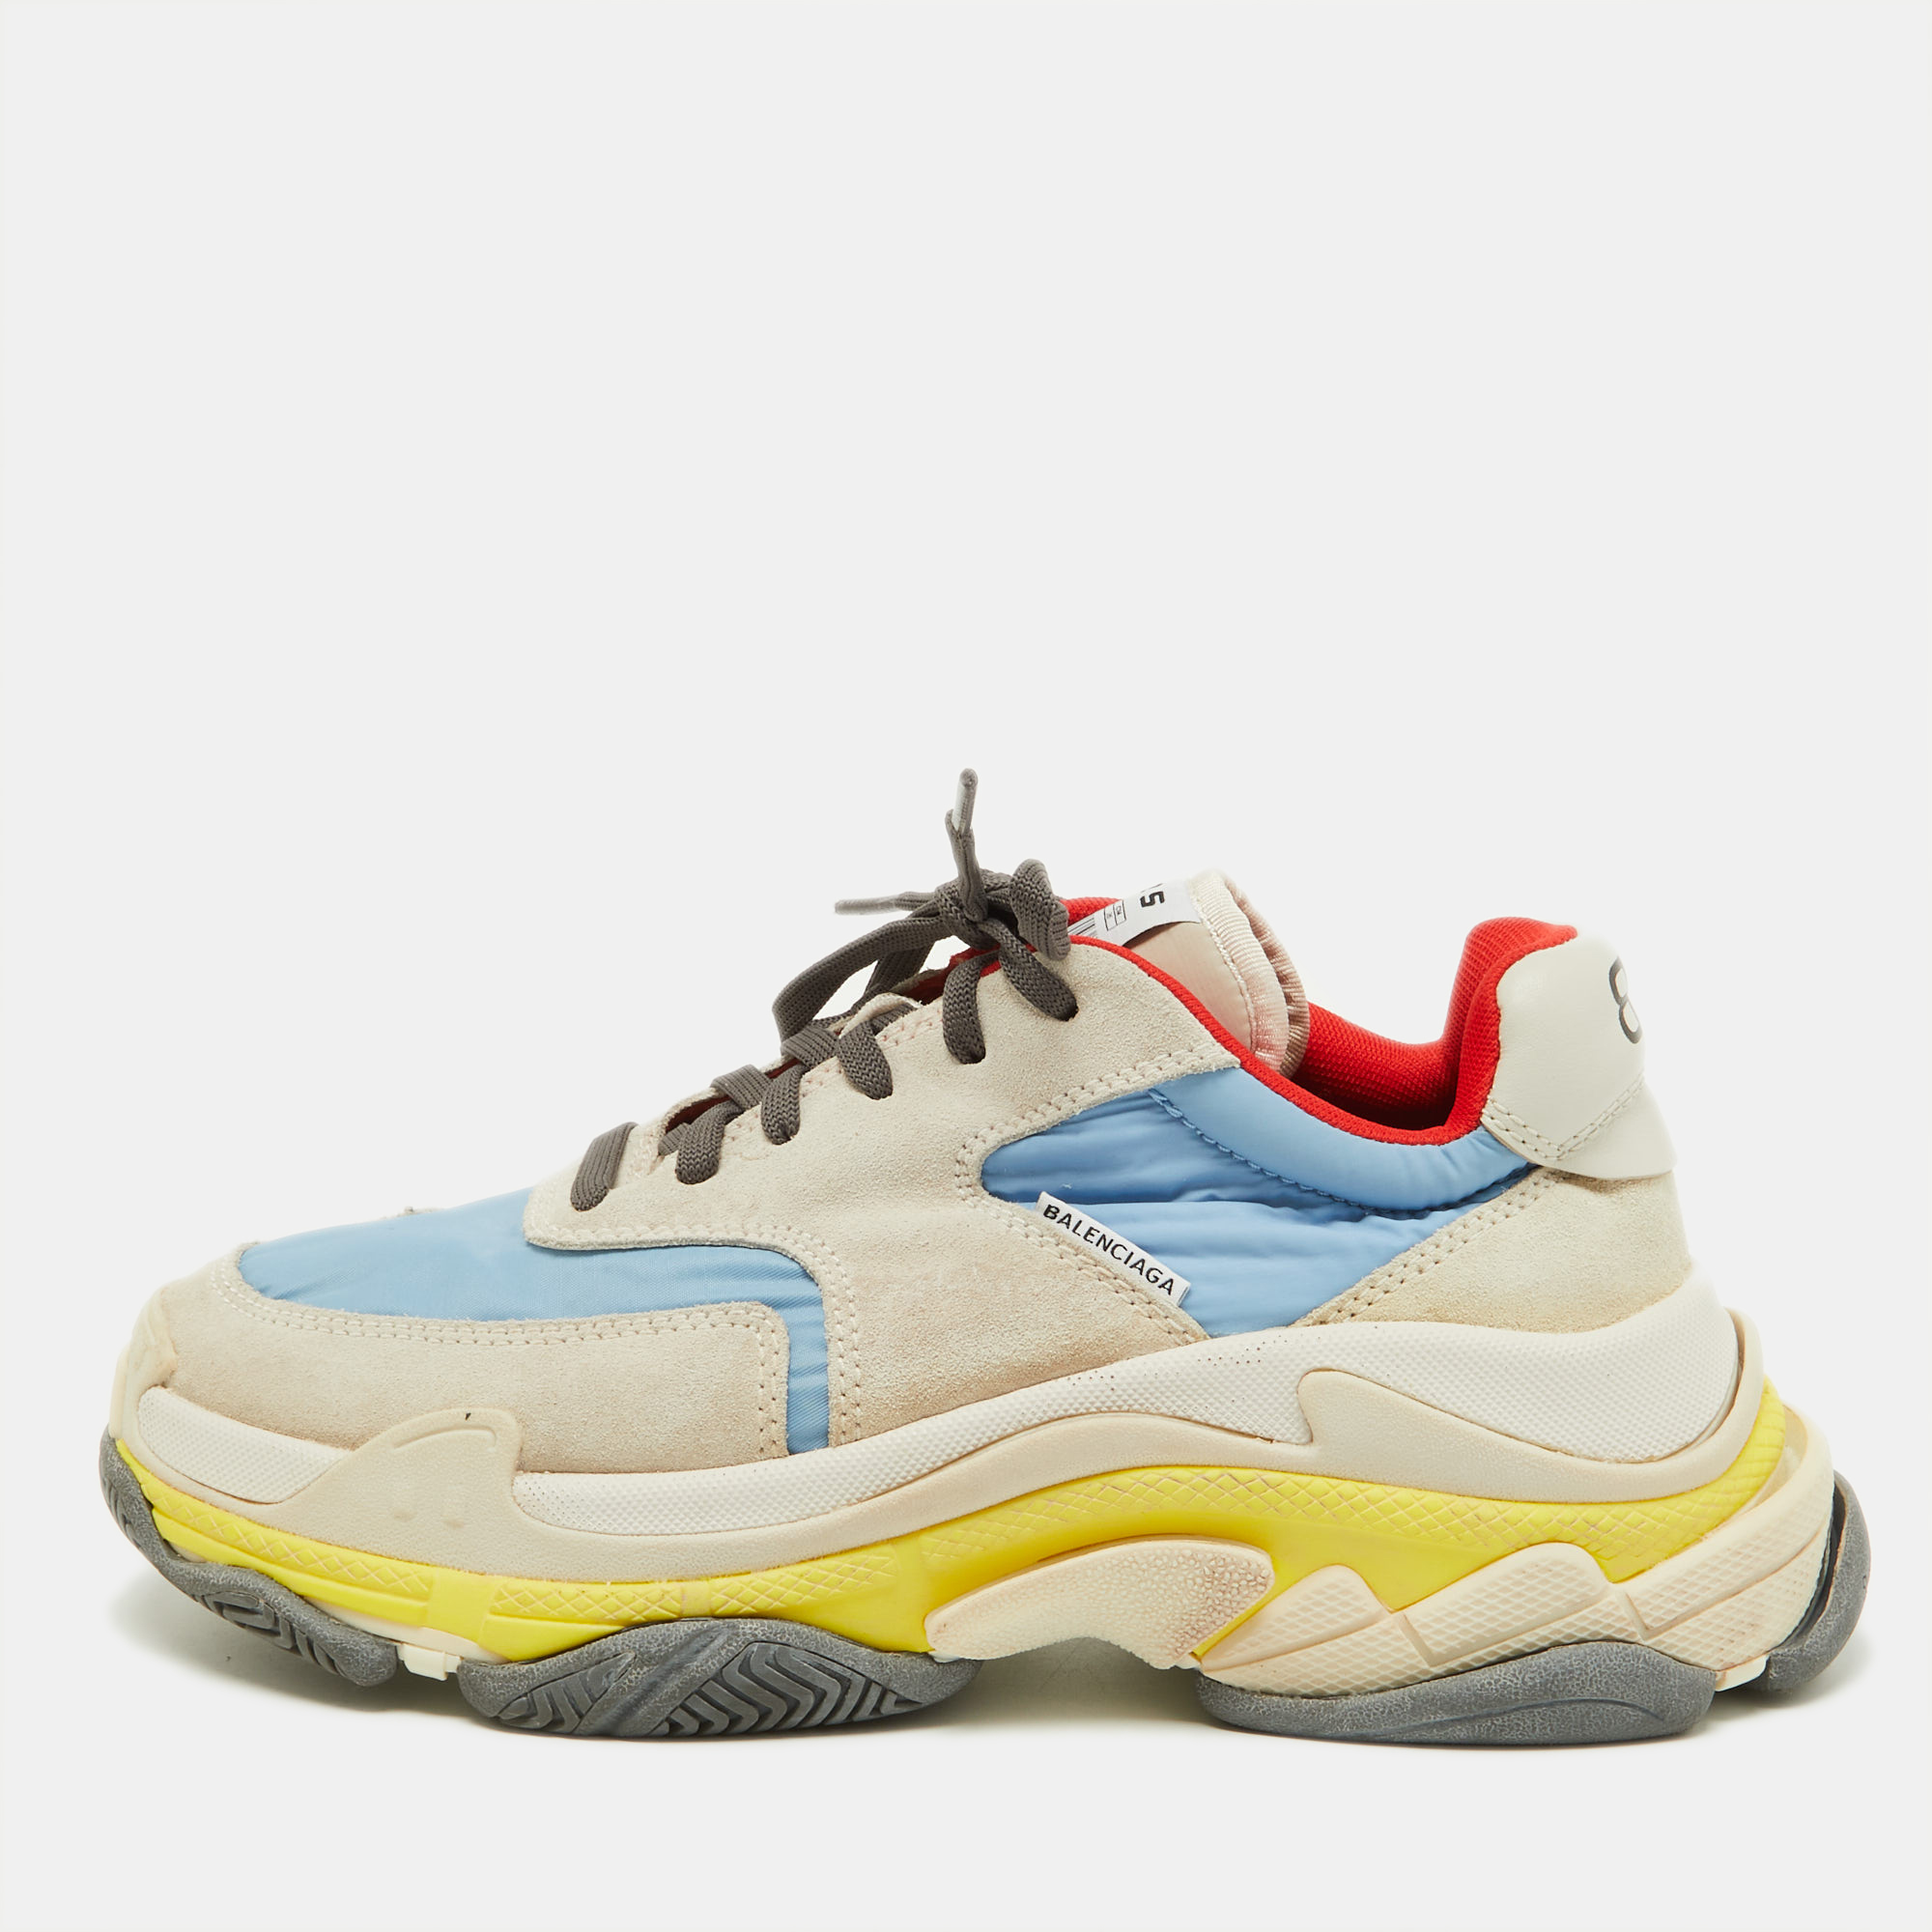 The Triple S by Balenciaga was first seen in January of 2017 but it dropped only in September of the same year. Once it launched the shoes shook the sneaker scene and started the Dad sneaker trend. Today they are on the feet of sneaker fans and celebrities all over the world.